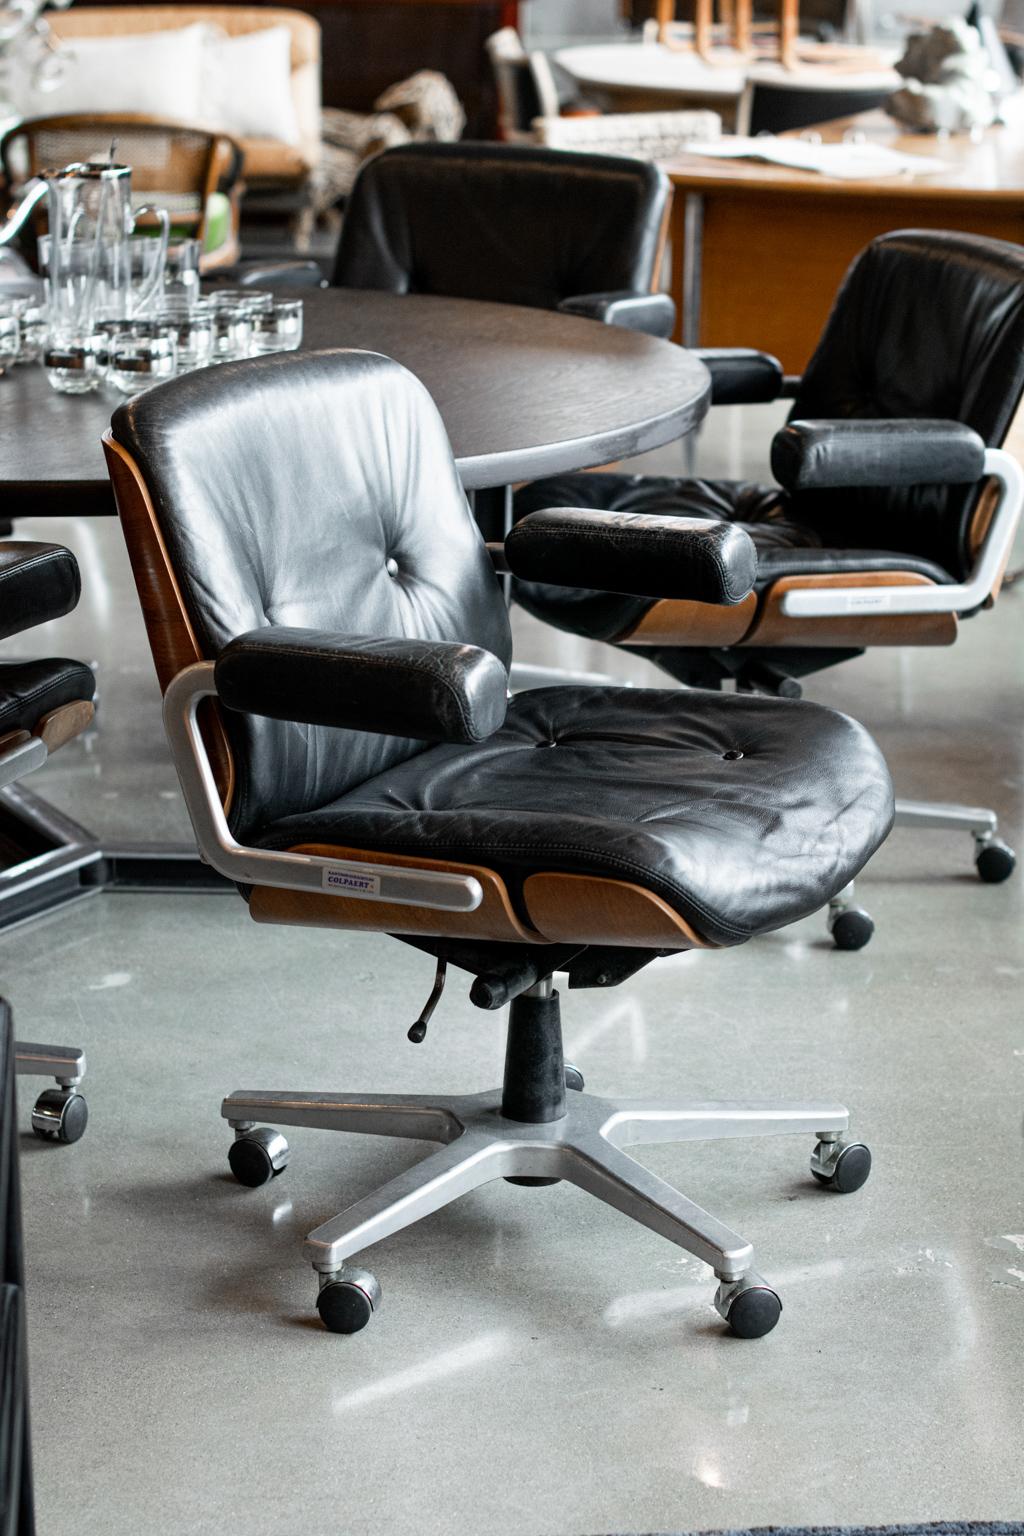 Rolling office/desk armchairs by Martin Stoll for Giroflex, in black leather with wood surrounds. Height adjustable and rocking mechanism, polished cast aluminum base with 5 smooth-running castors. Swivel seats are soft leather and comfortable.